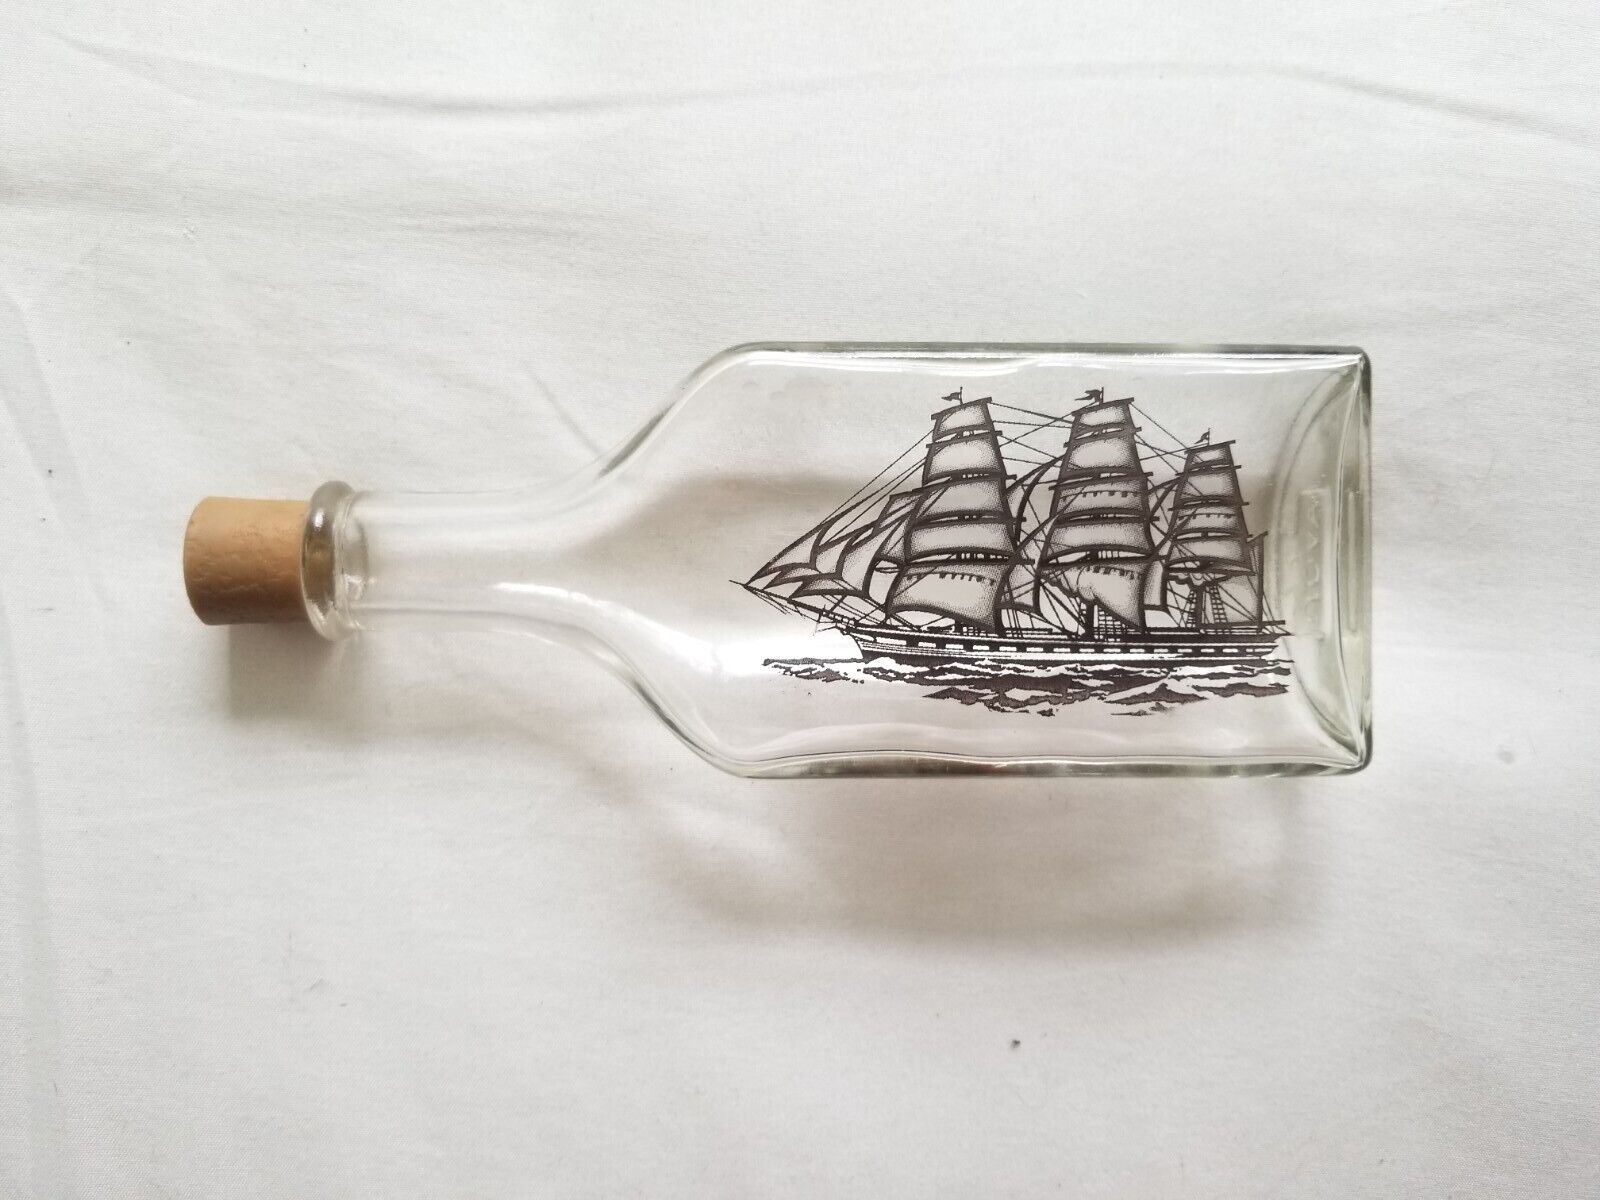 Vintage Avon Captains Pride Simulated Ship in Bottle Cologne Decanter Nautical